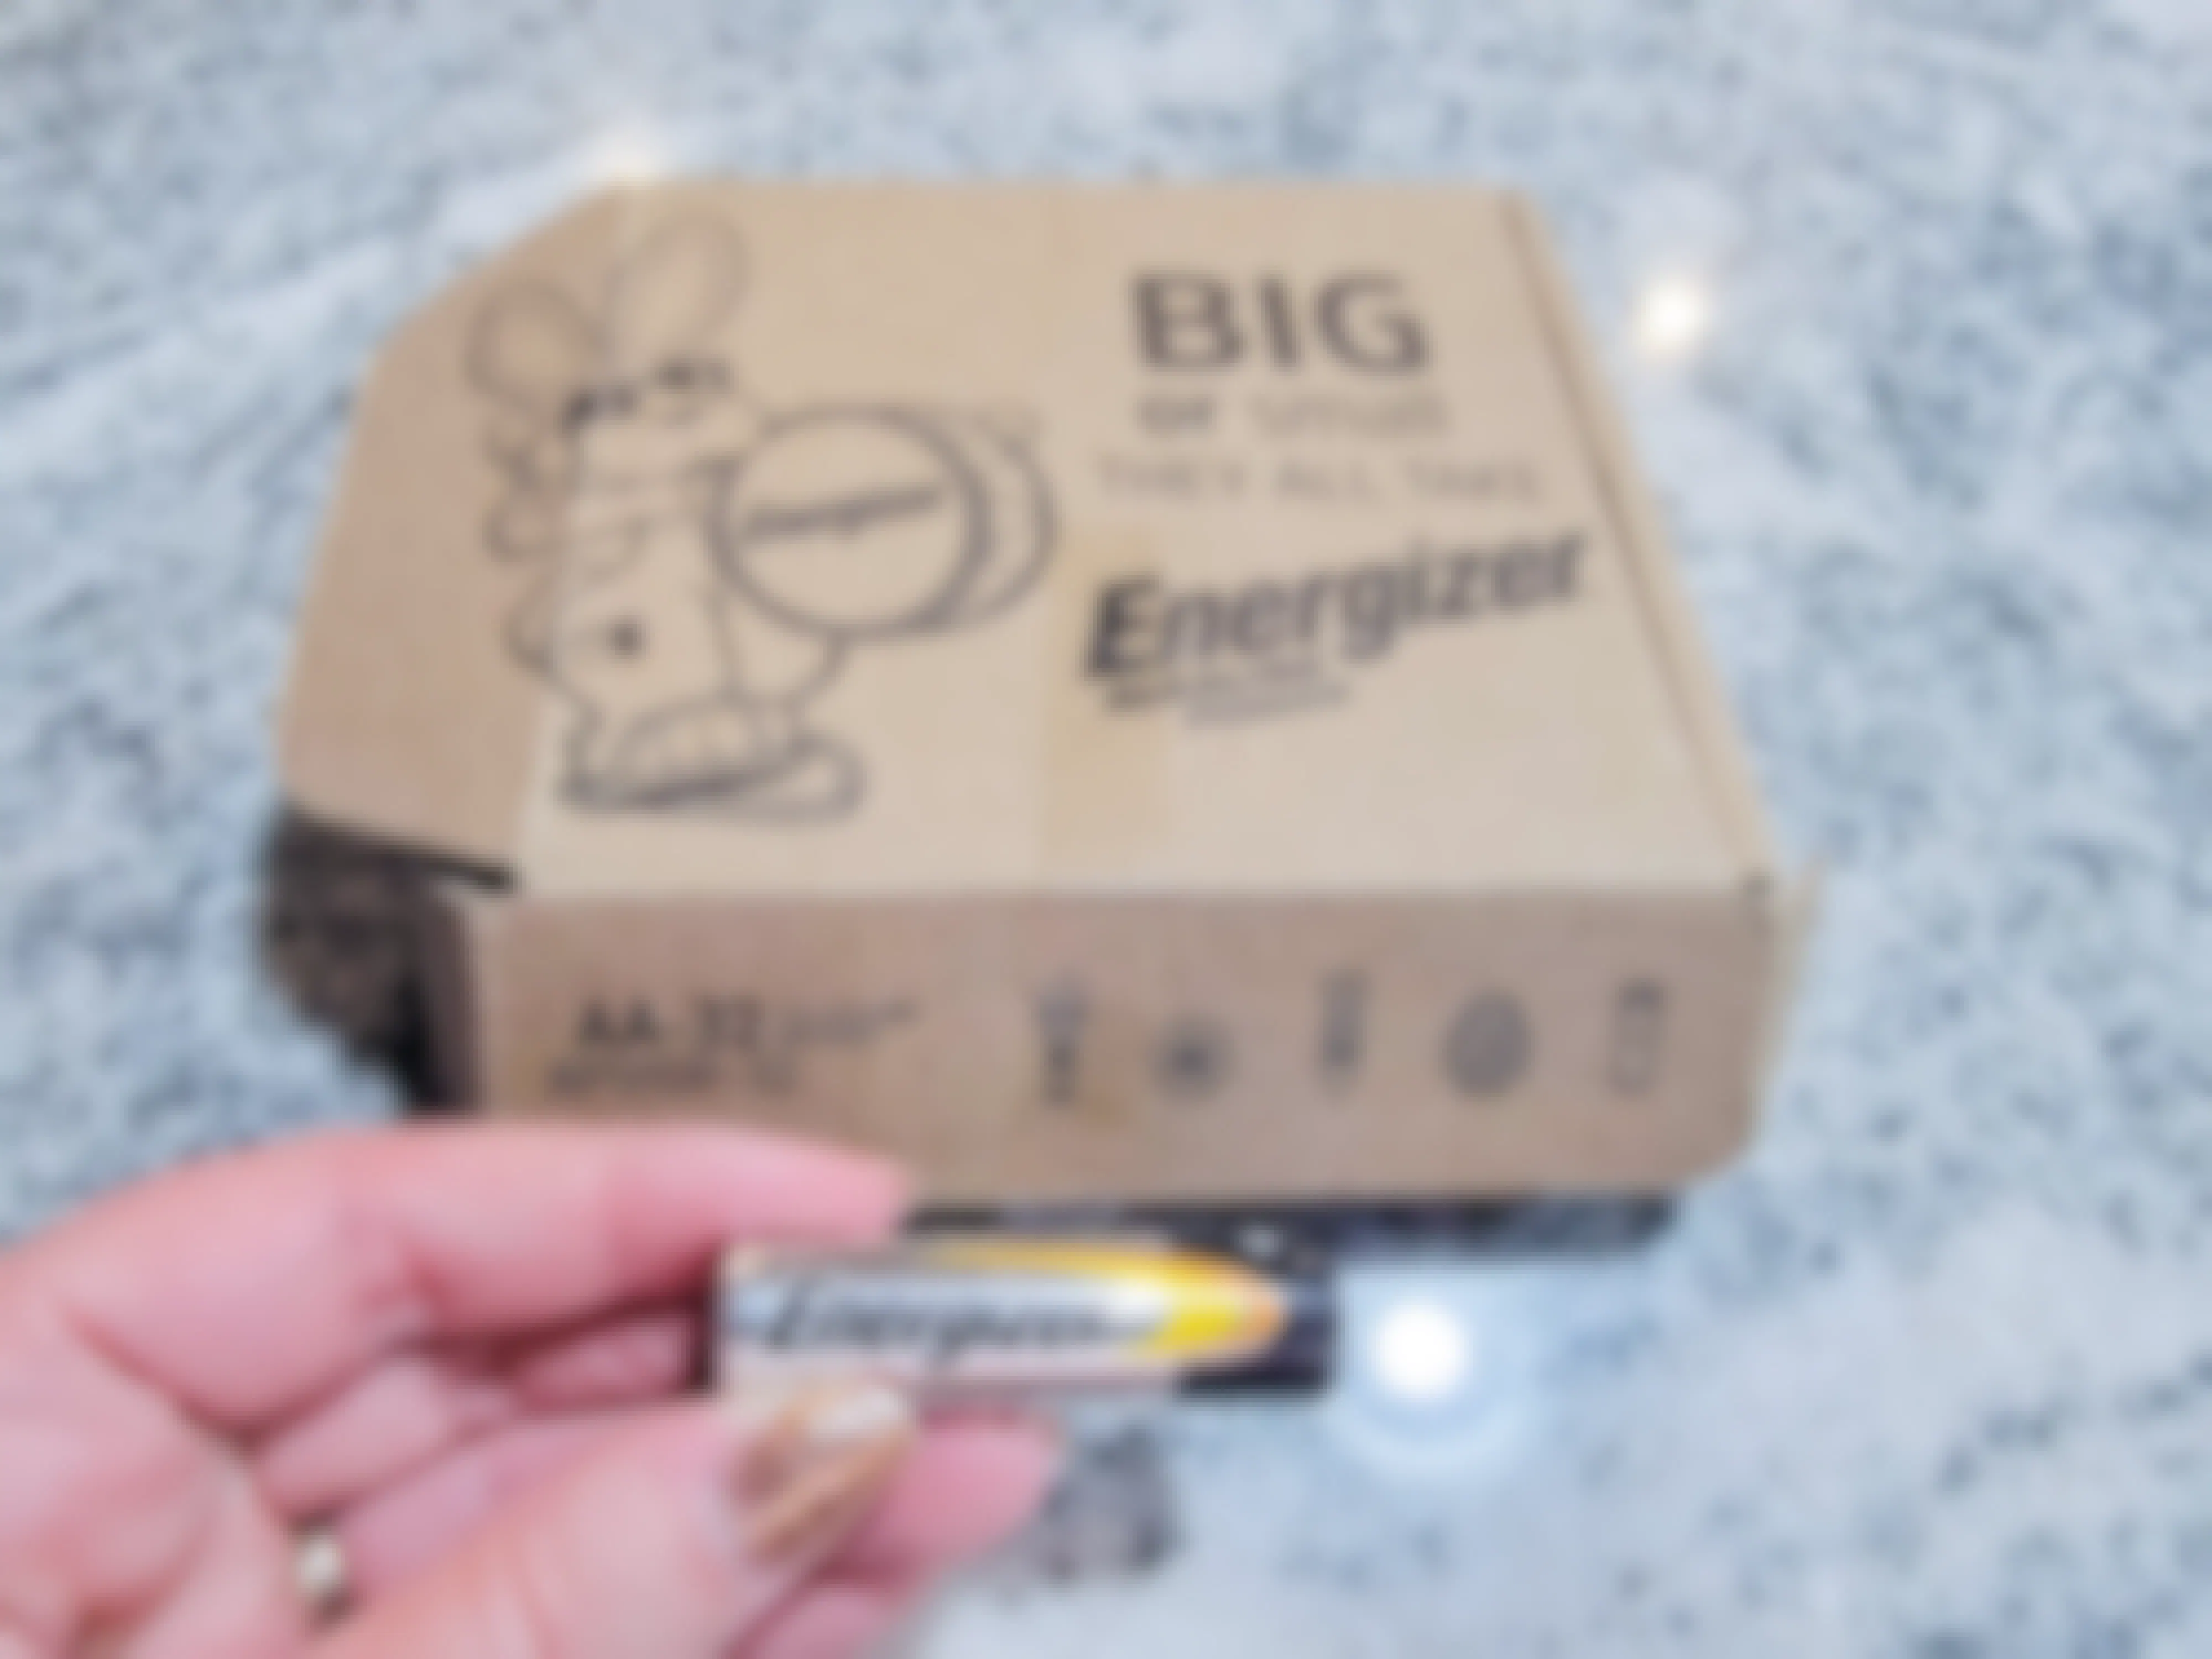 Energizer batteries with a box